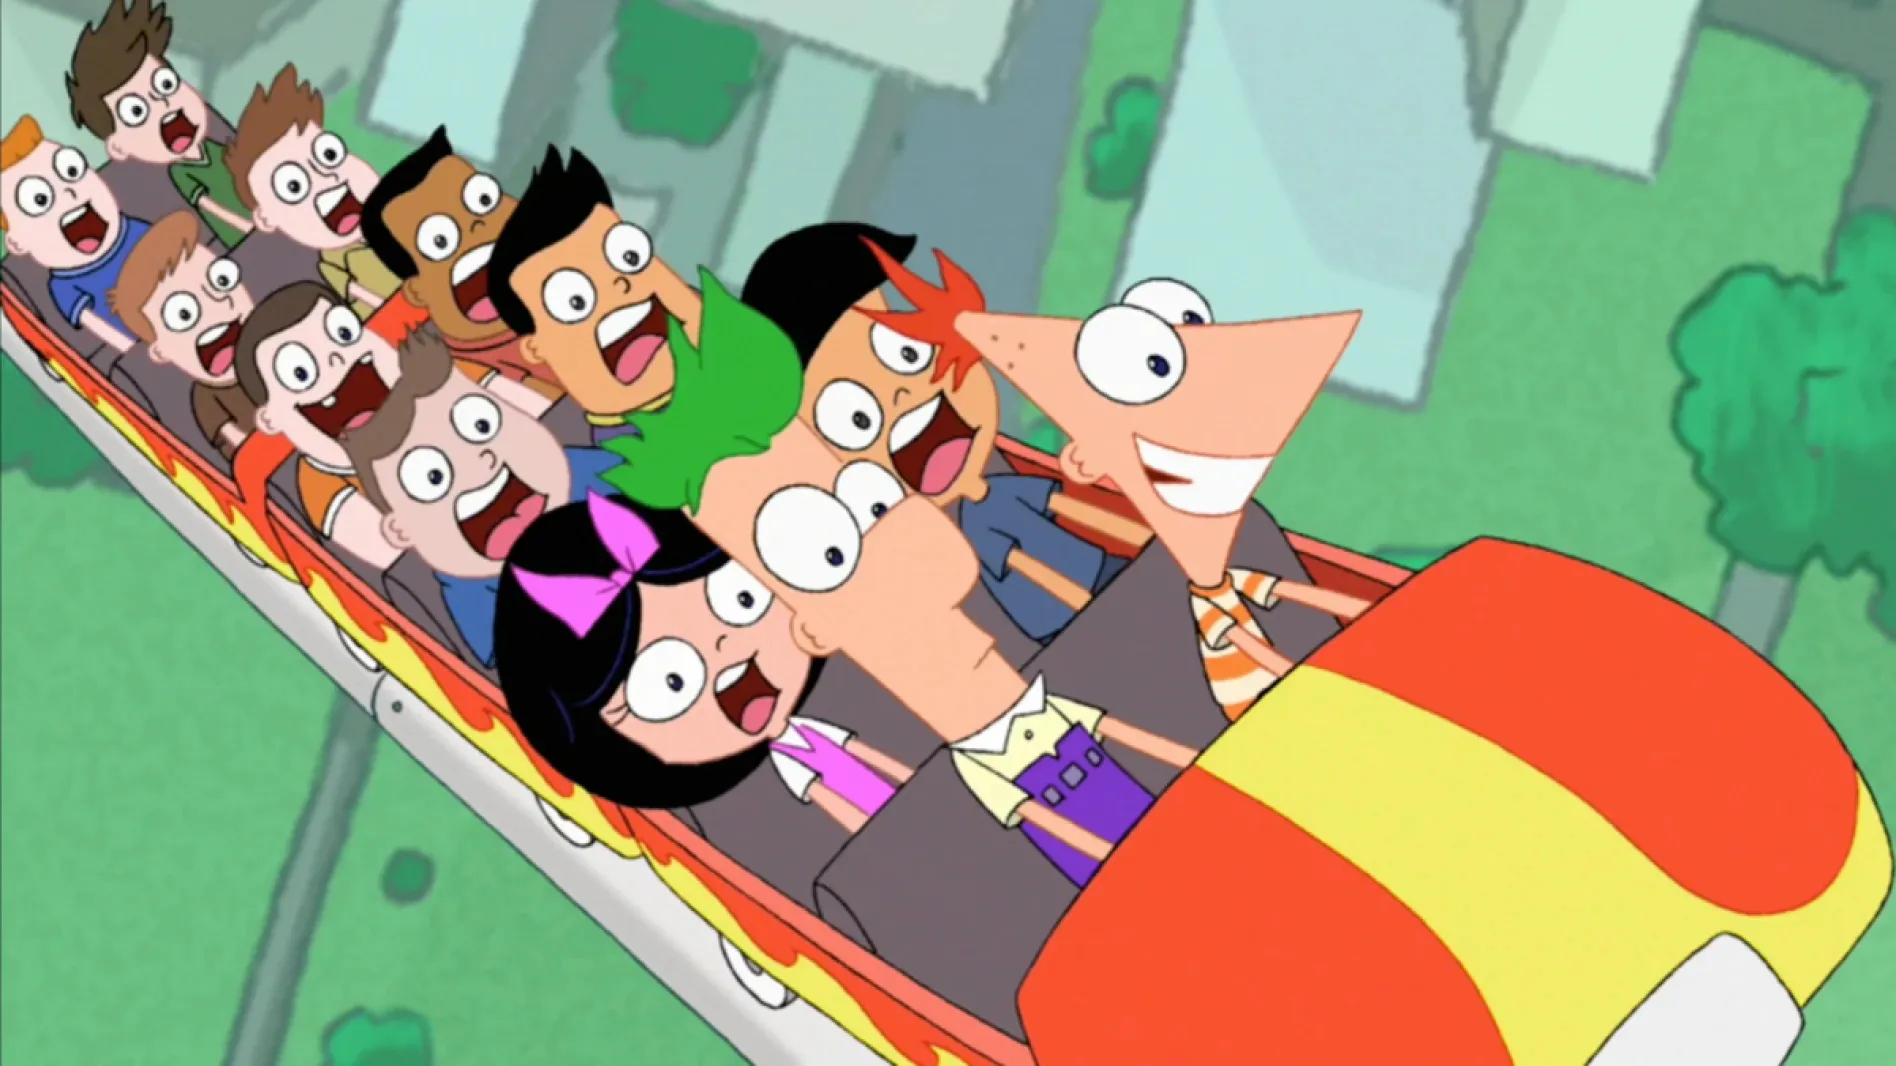 Phineas and Ferb in the show